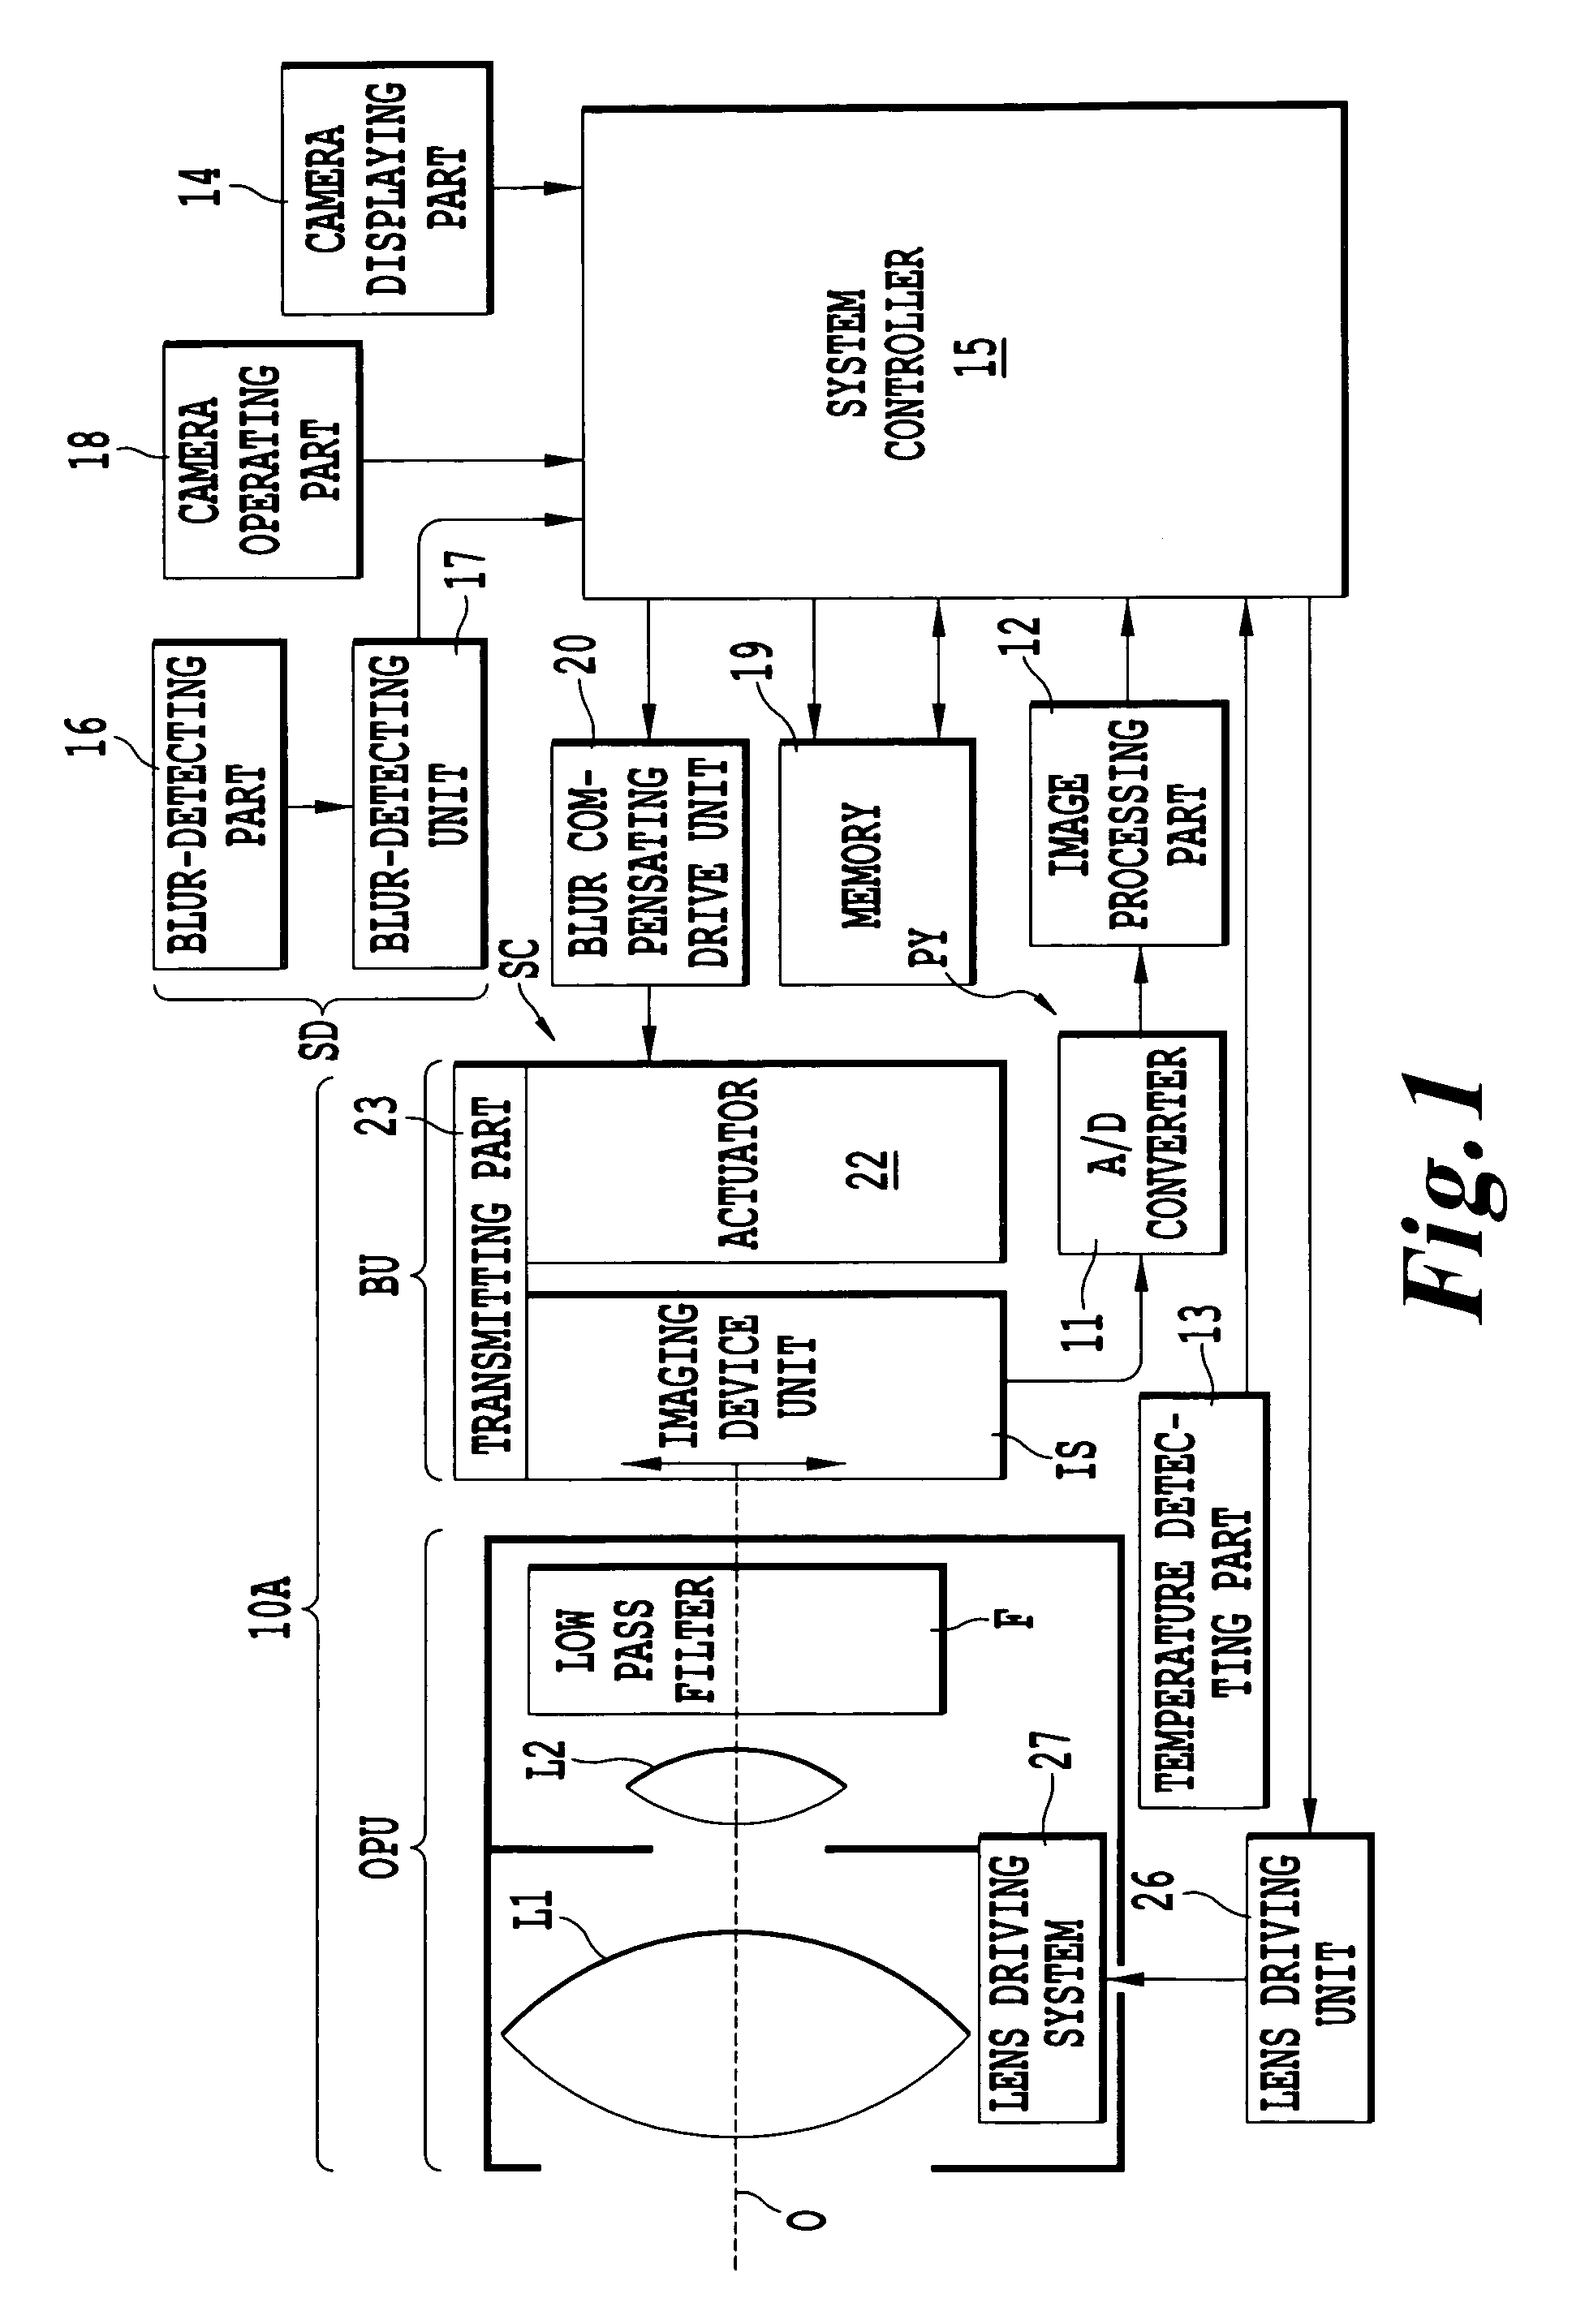 Image capturing apparatus with blur compensation